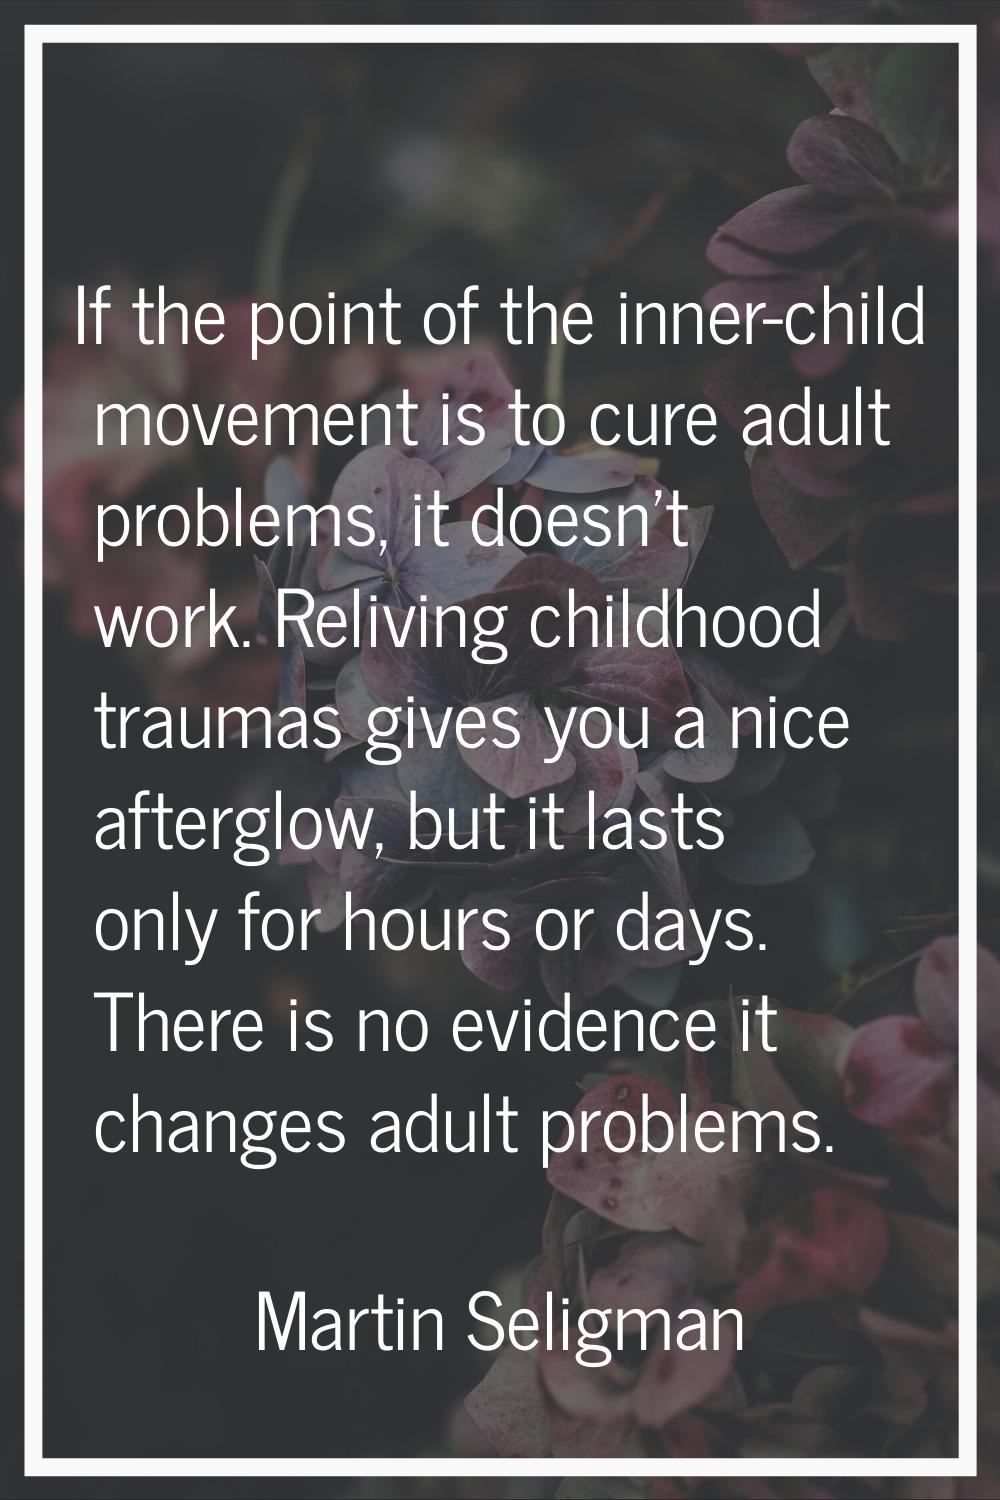 If the point of the inner-child movement is to cure adult problems, it doesn't work. Reliving child